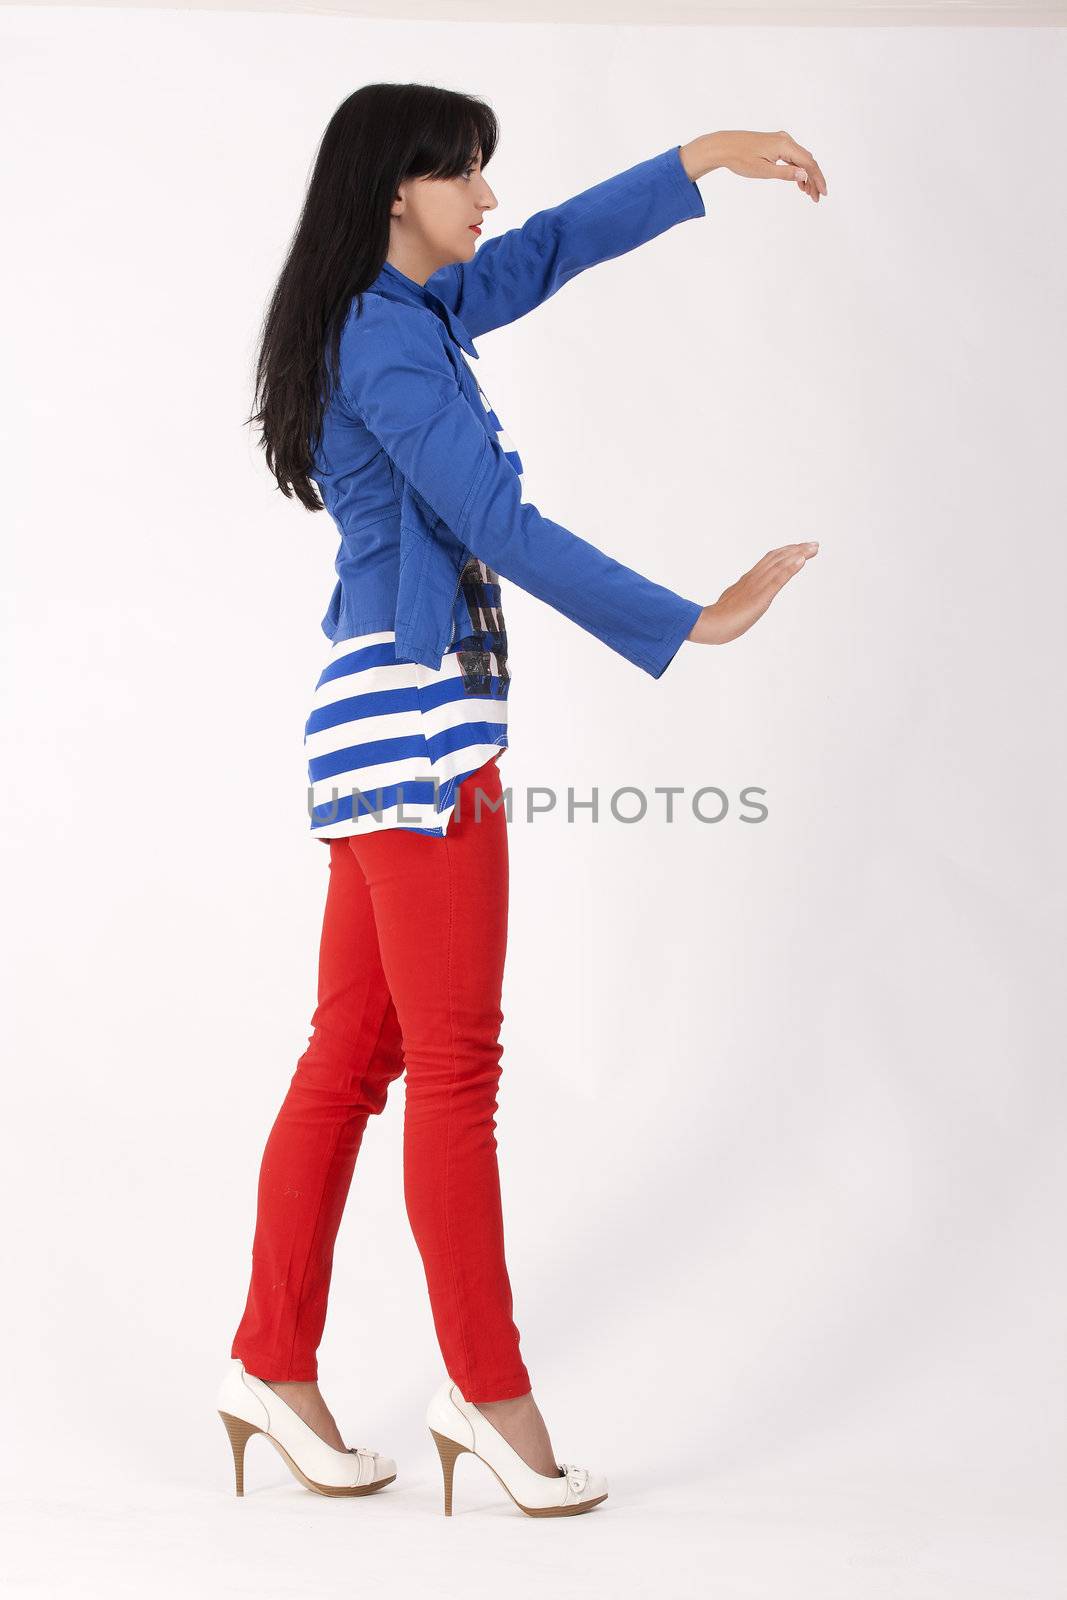 Red + Stripes by STphotography